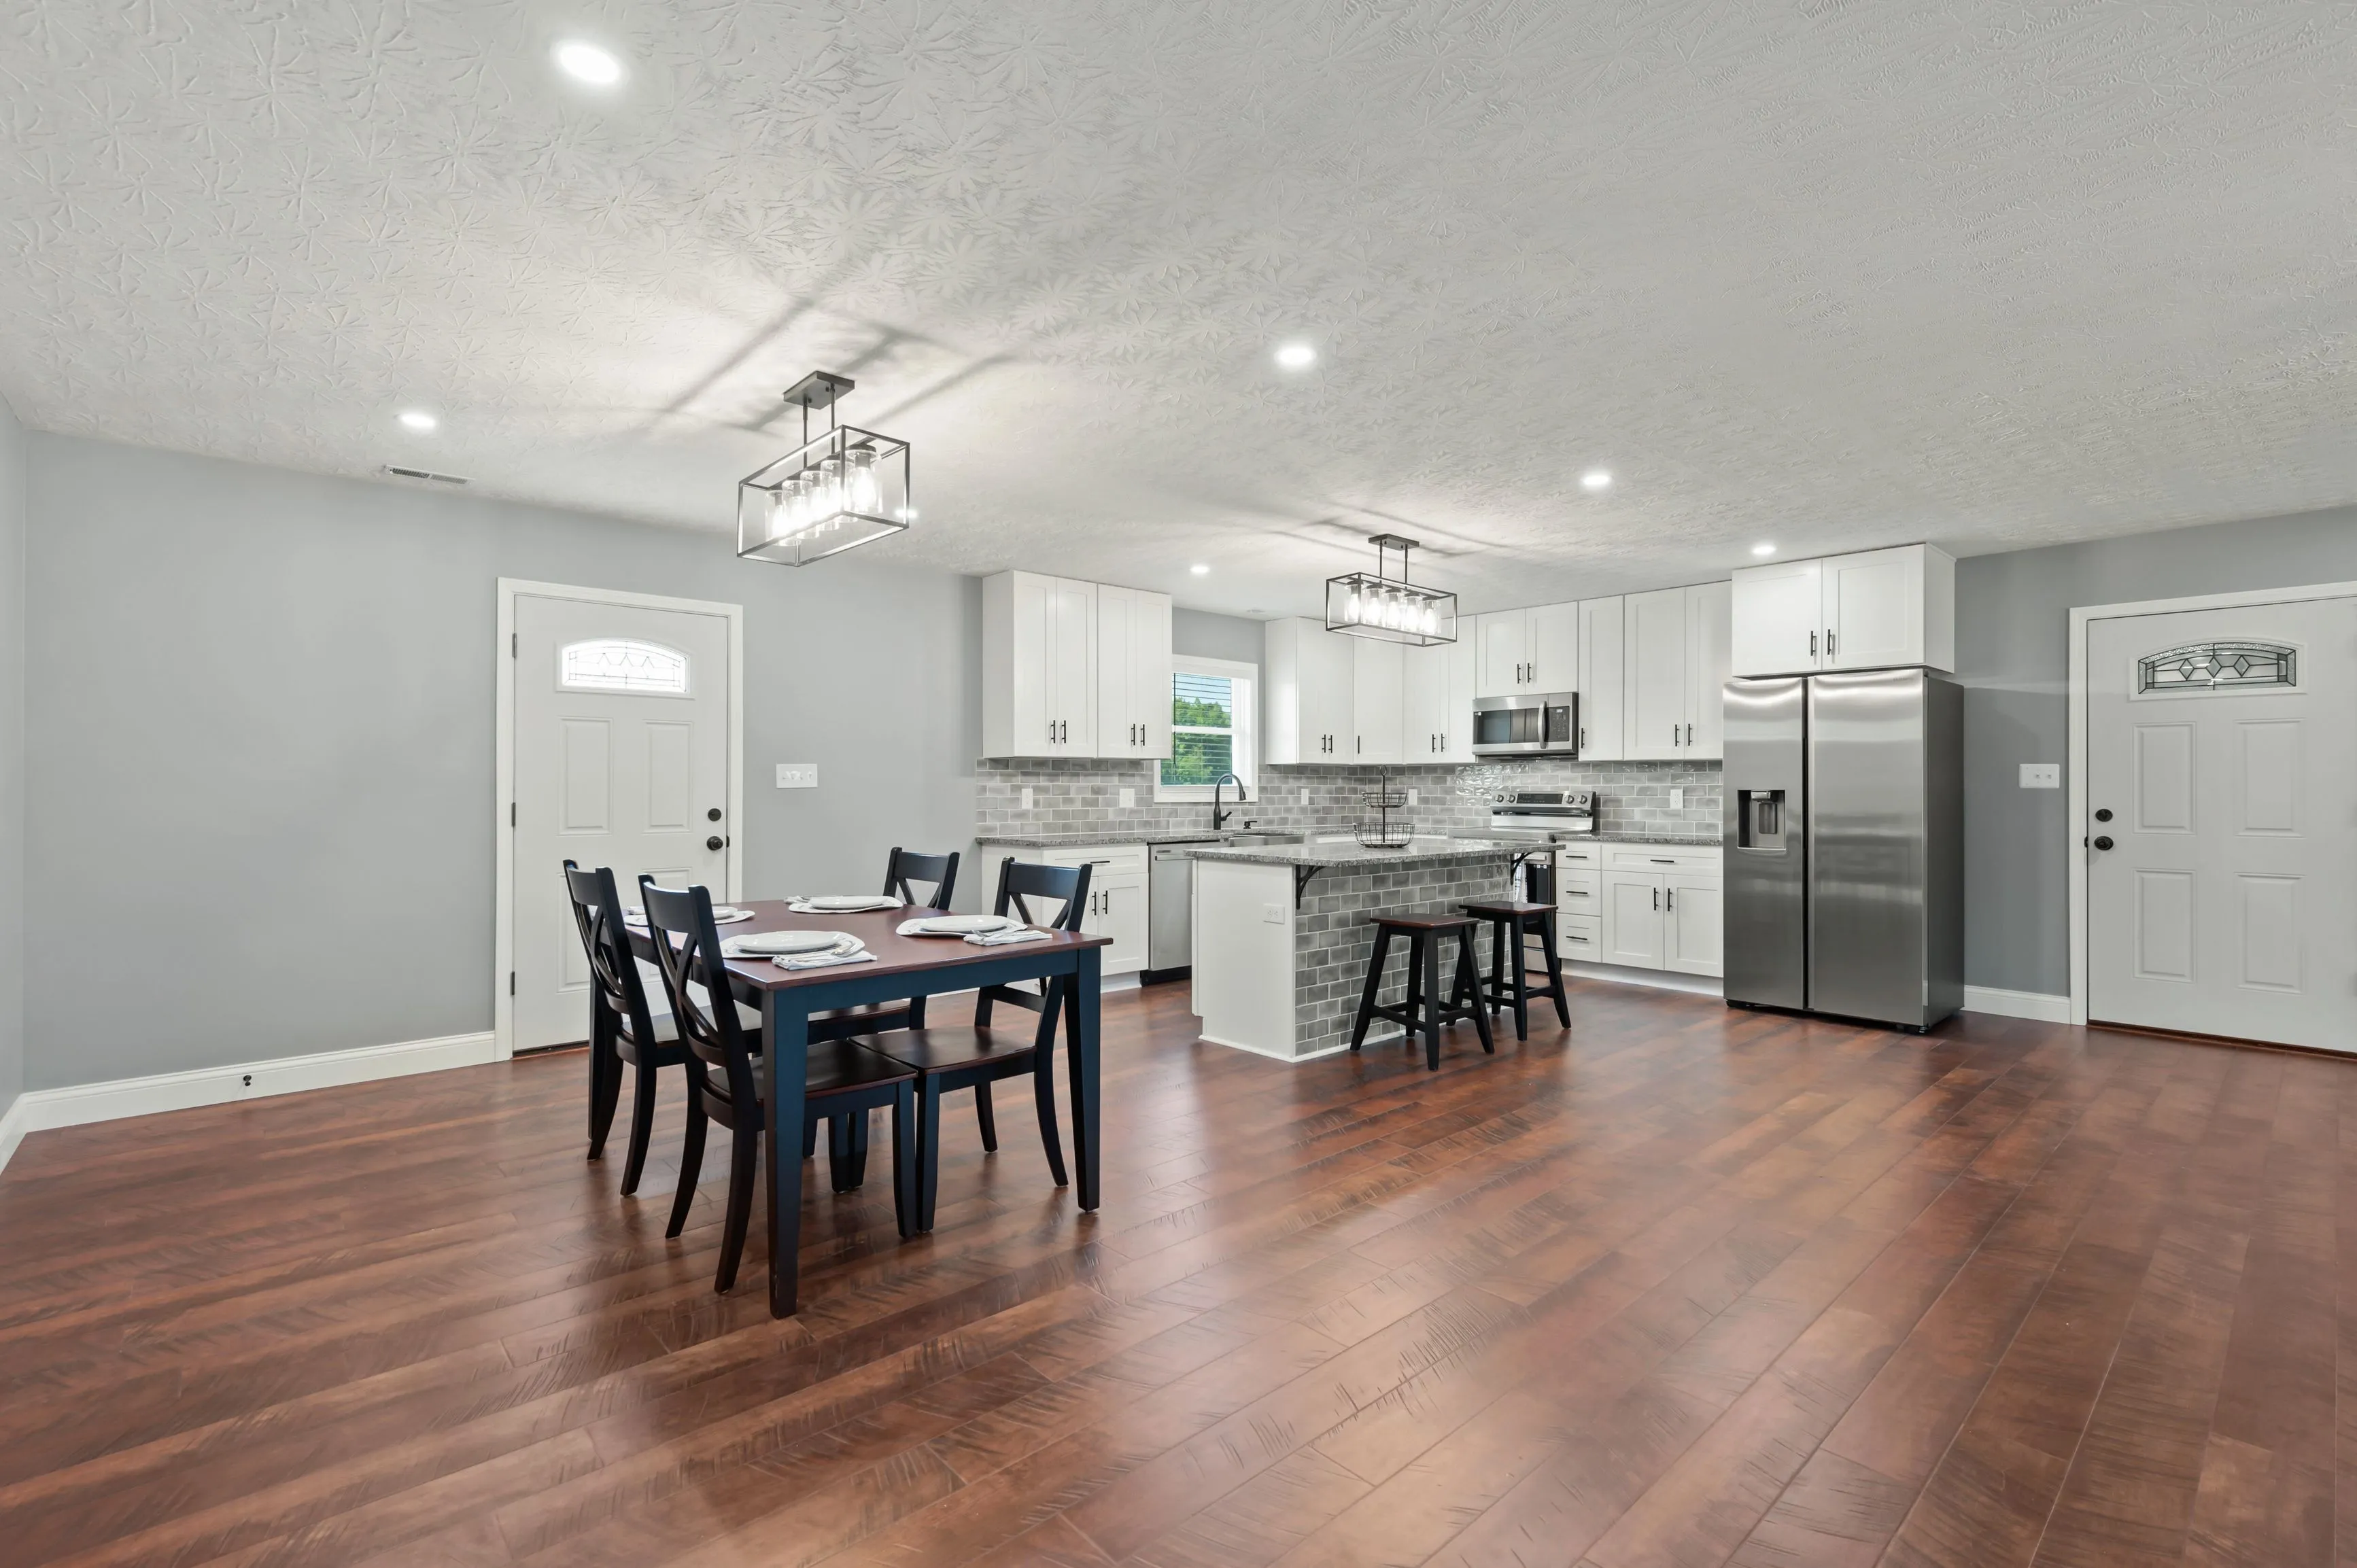 Modern spacious kitchen and dining area with gray walls, stainless steel appliances, white cabinets, a dining table set, and hardwood flooring.